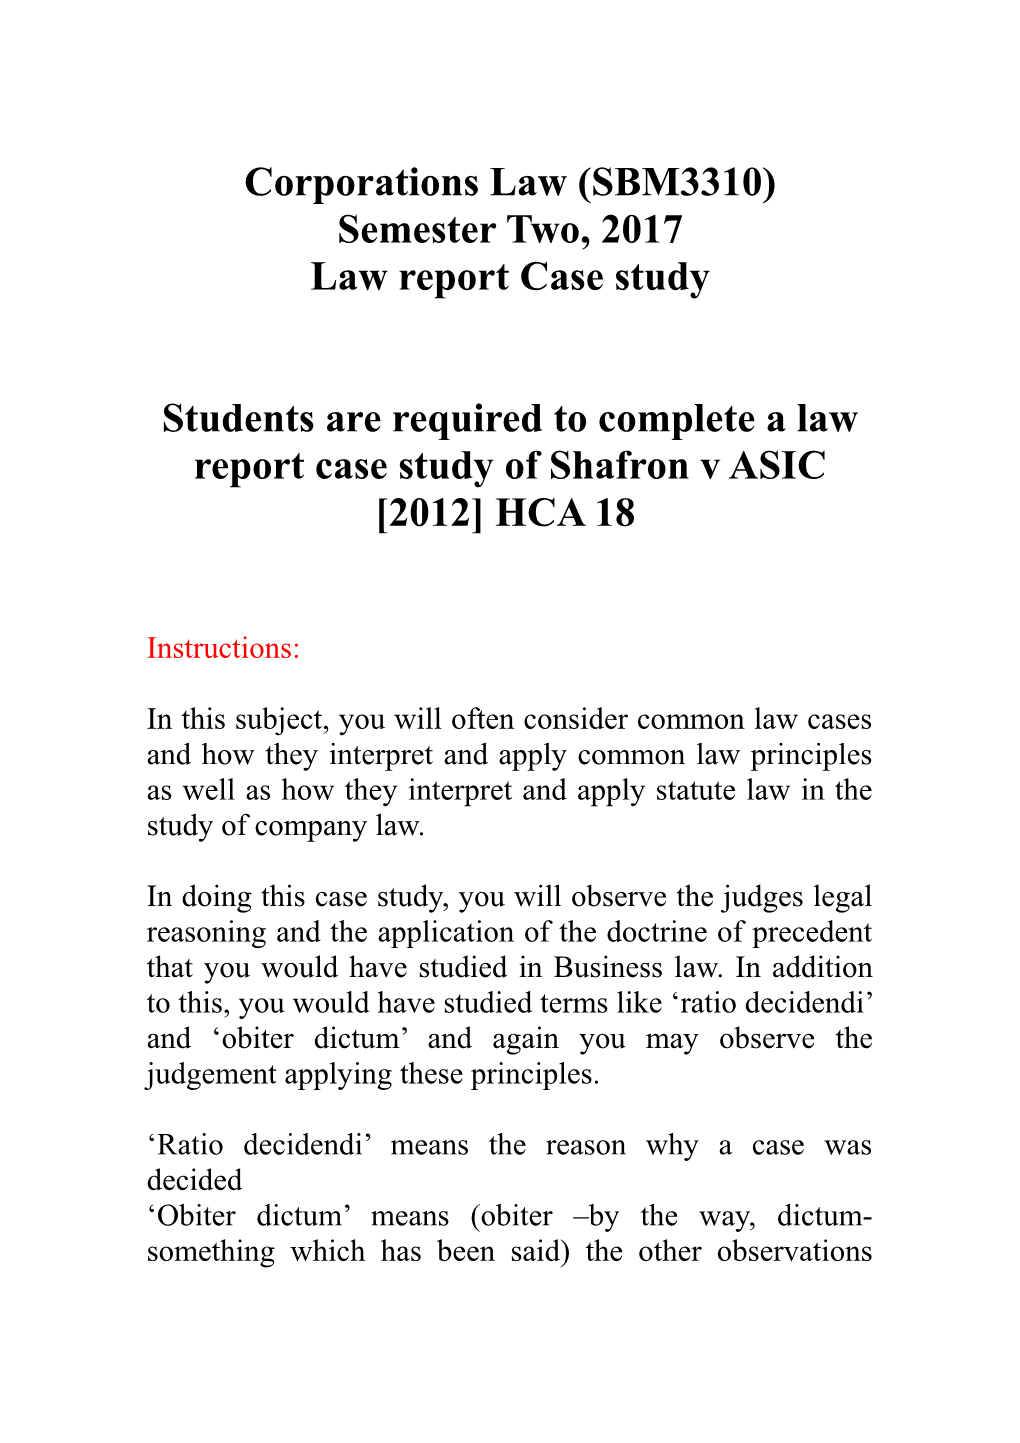 Law Report Case Study